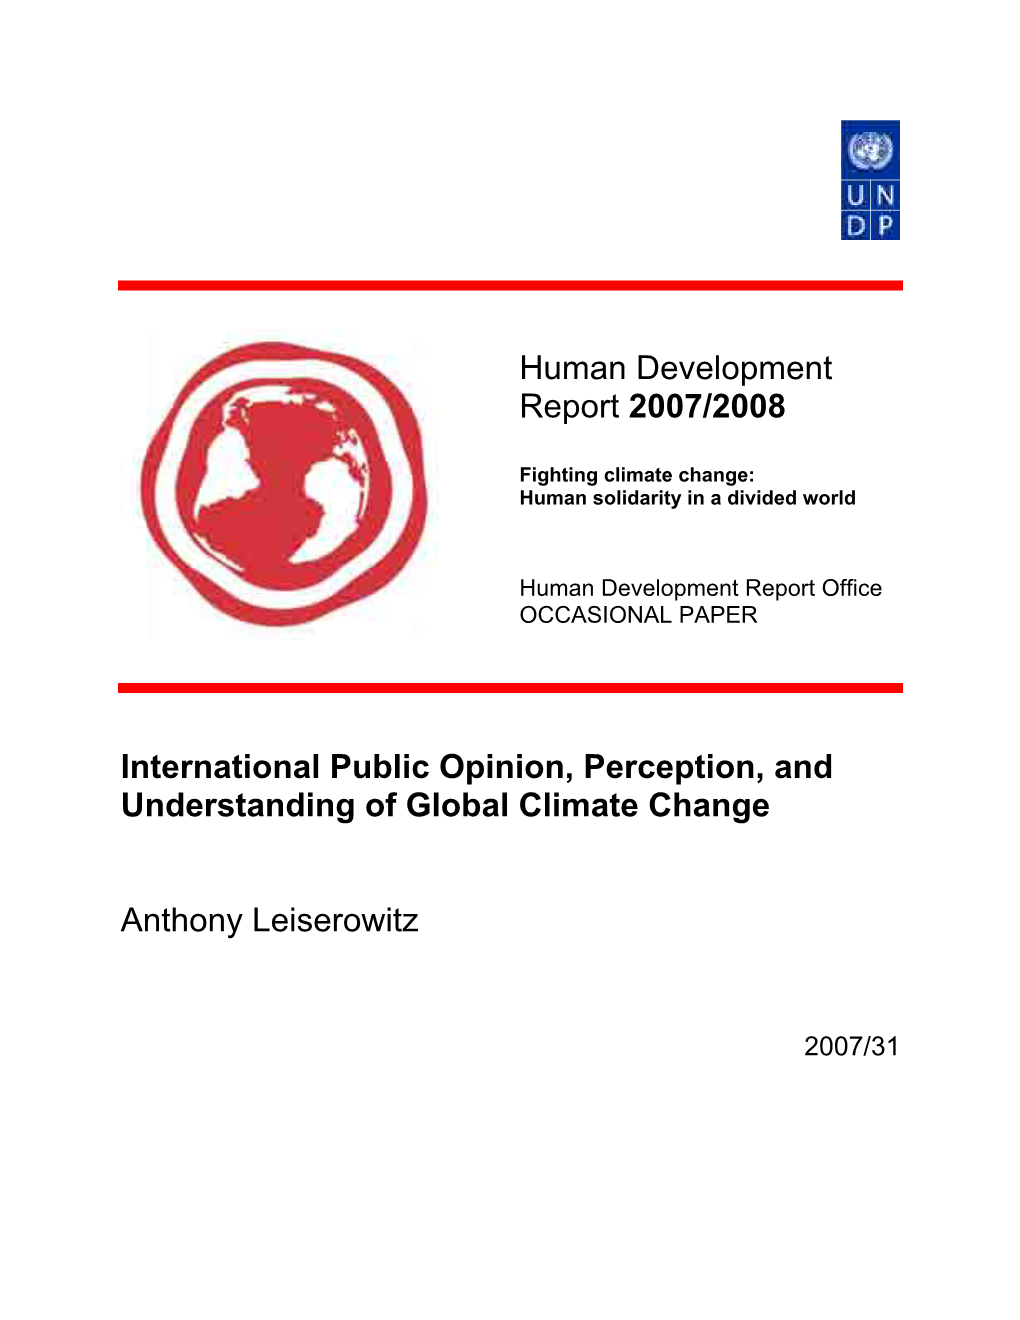 Human Development Report 2007/2008 International Public Opinion, Perception, and Understanding of Global Climate Change Anthony